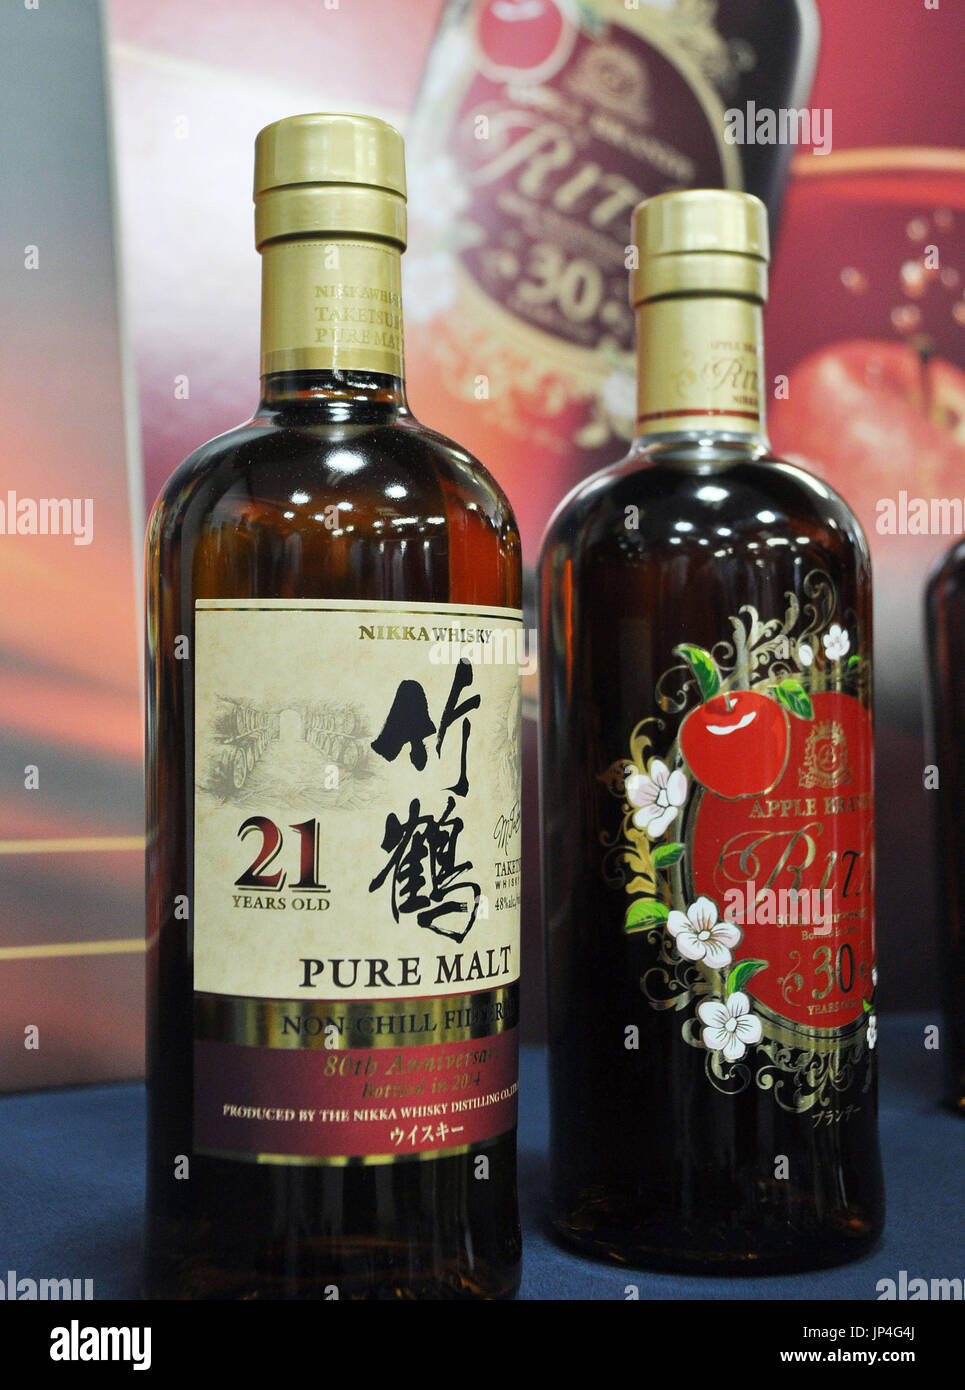 TOKYO, Japan - Nikka Whisky Distilling Co. releases special versions of whisky (L) and brandy to commemorate the 80th anniversary of the firm's establishment in Tokyo on July 2, 2014. (Kyodo) Stock Photo